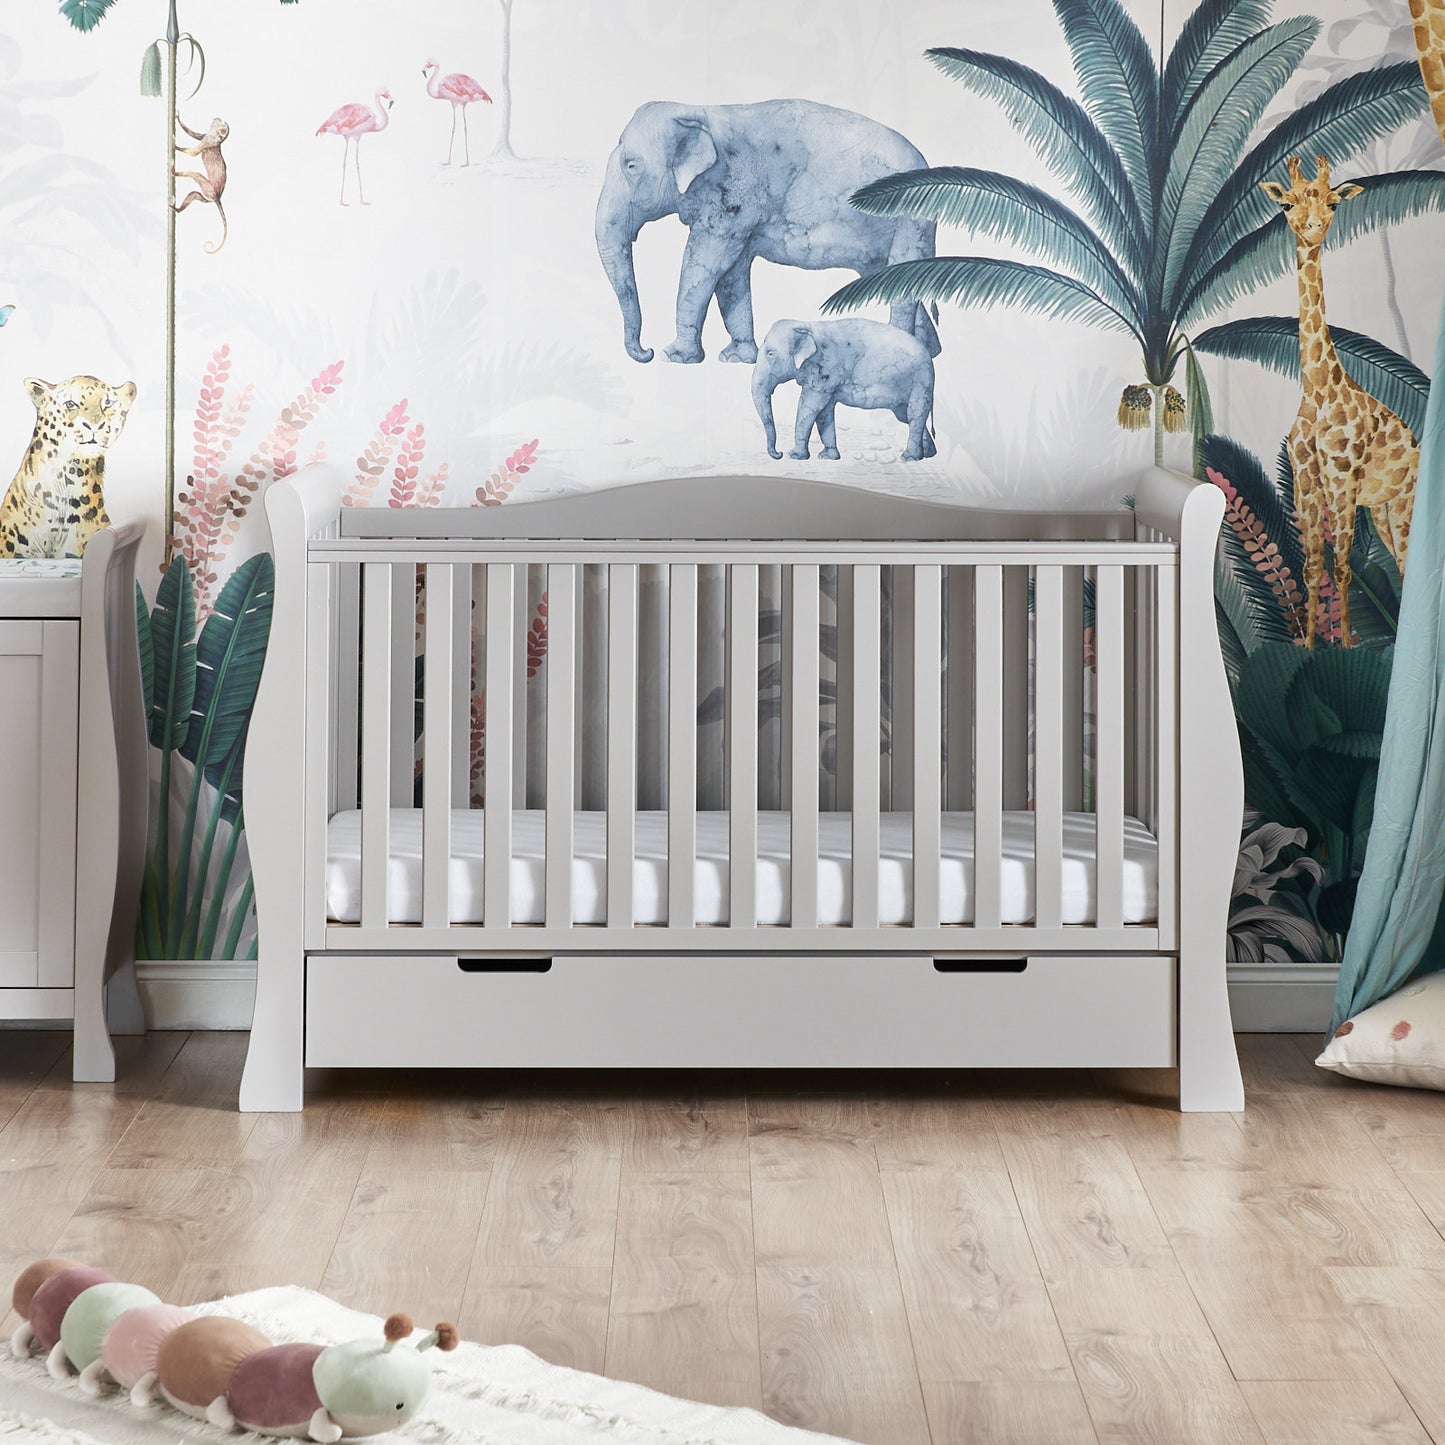 Obaby Stamford Luxe 2 Piece Room Set